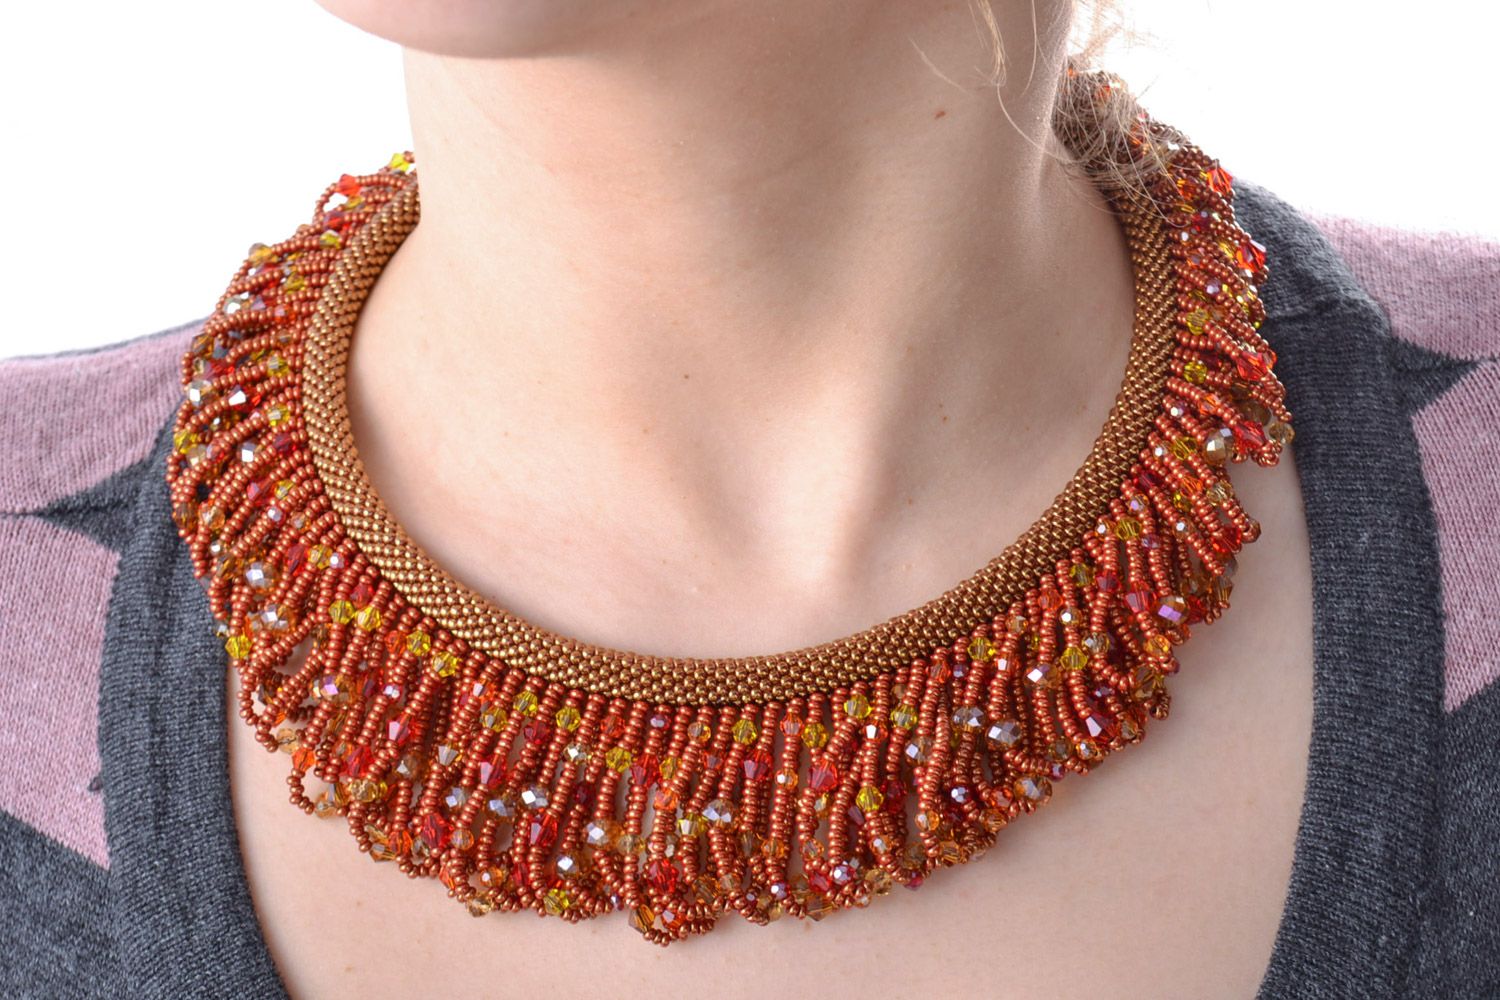 Massive handmade necklace woven of beads with fringe in warm color palette photo 1